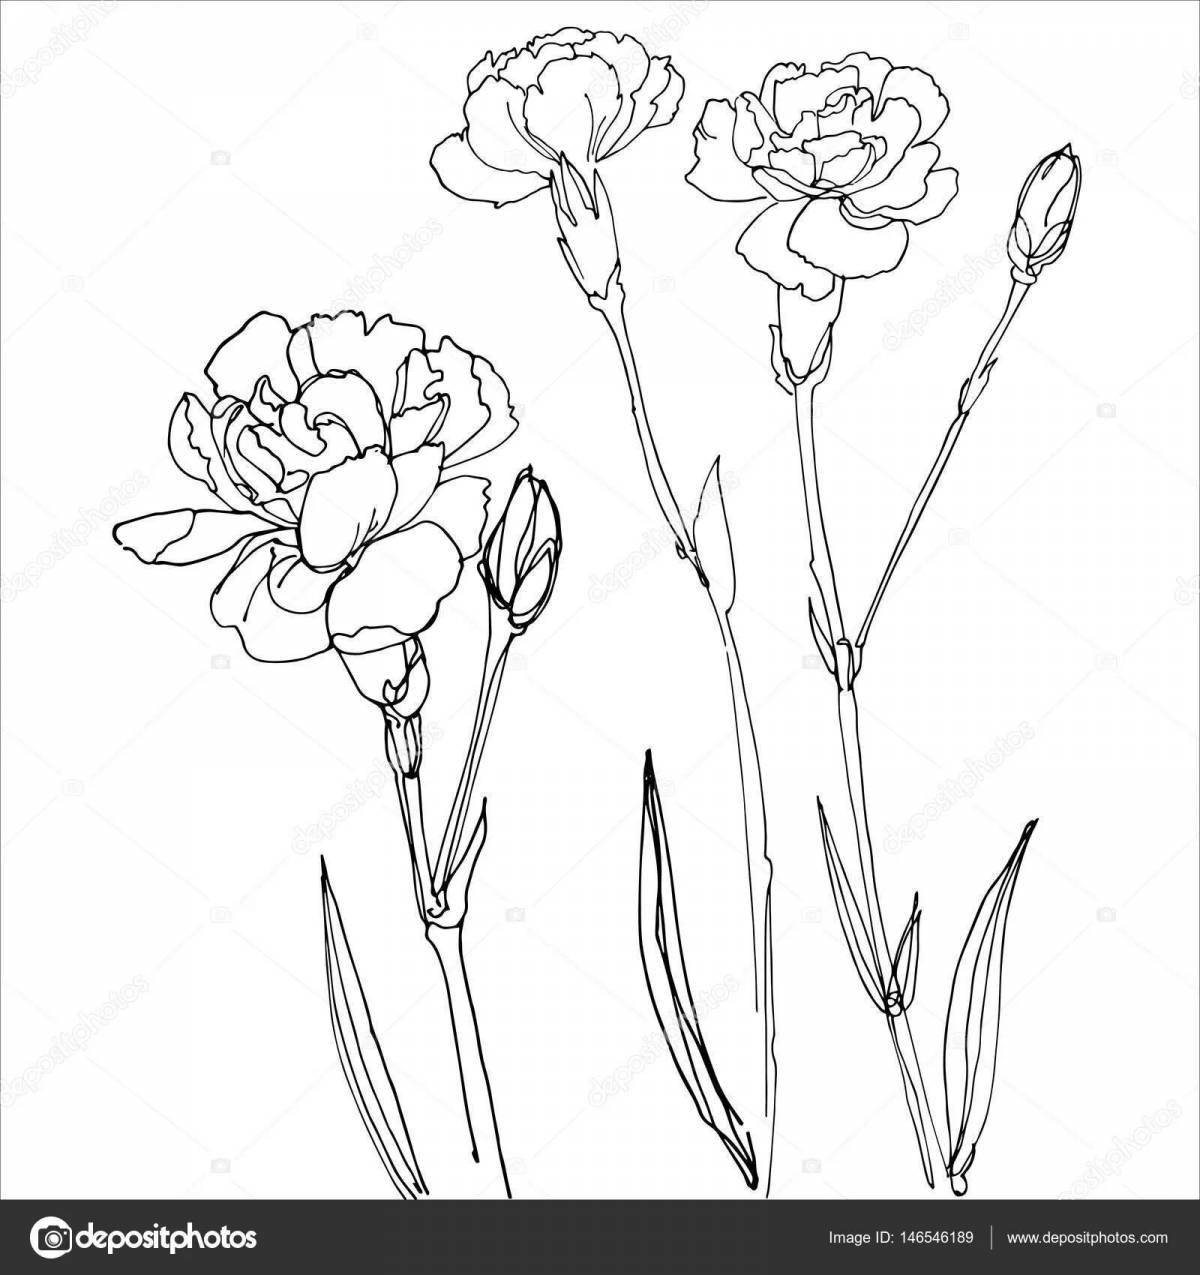 Lovely carnation coloring page for kids